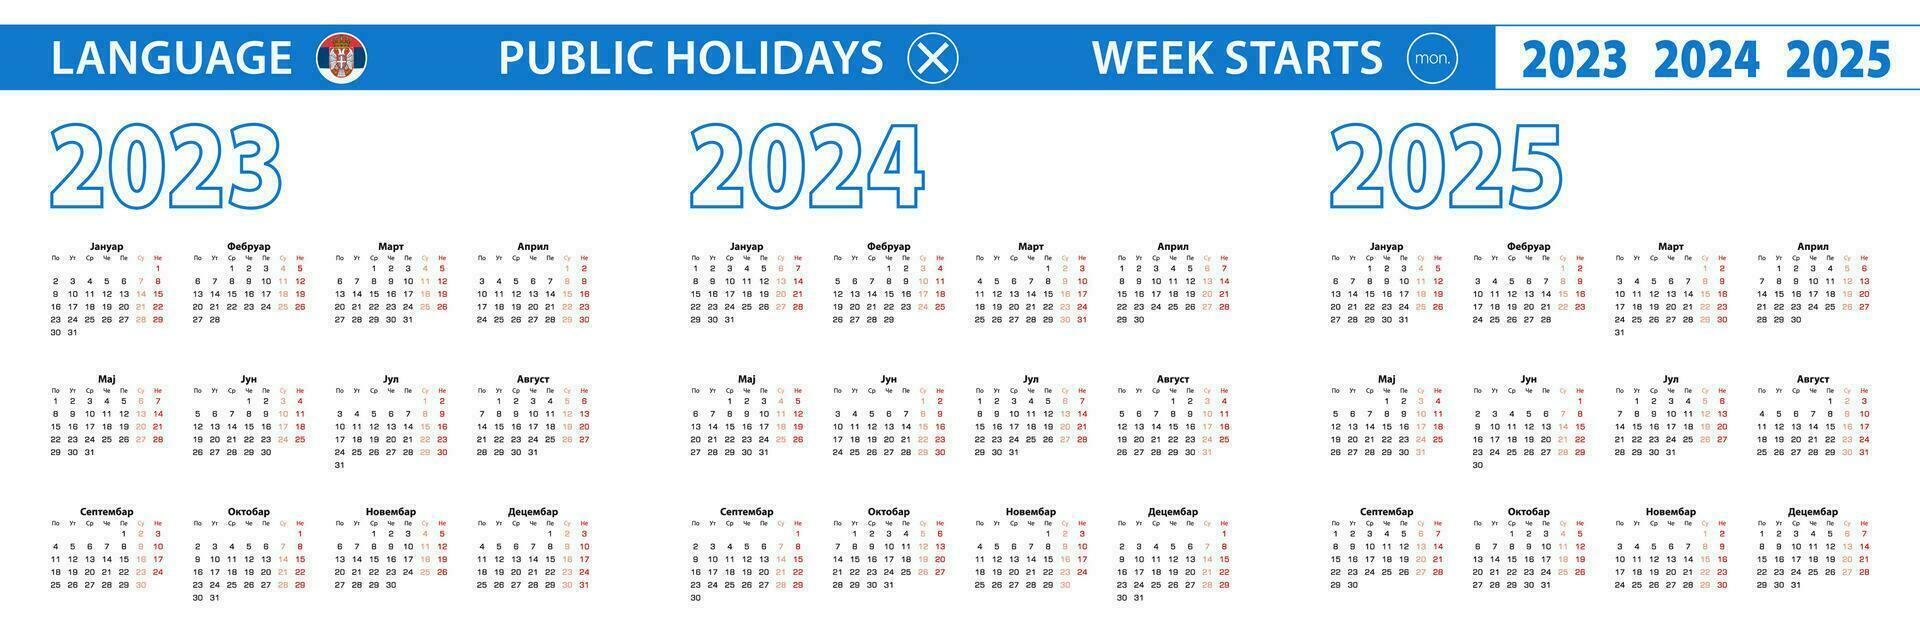 Simple calendar template in Serbian for 2023, 2024, 2025 years. Week starts from Monday. vector